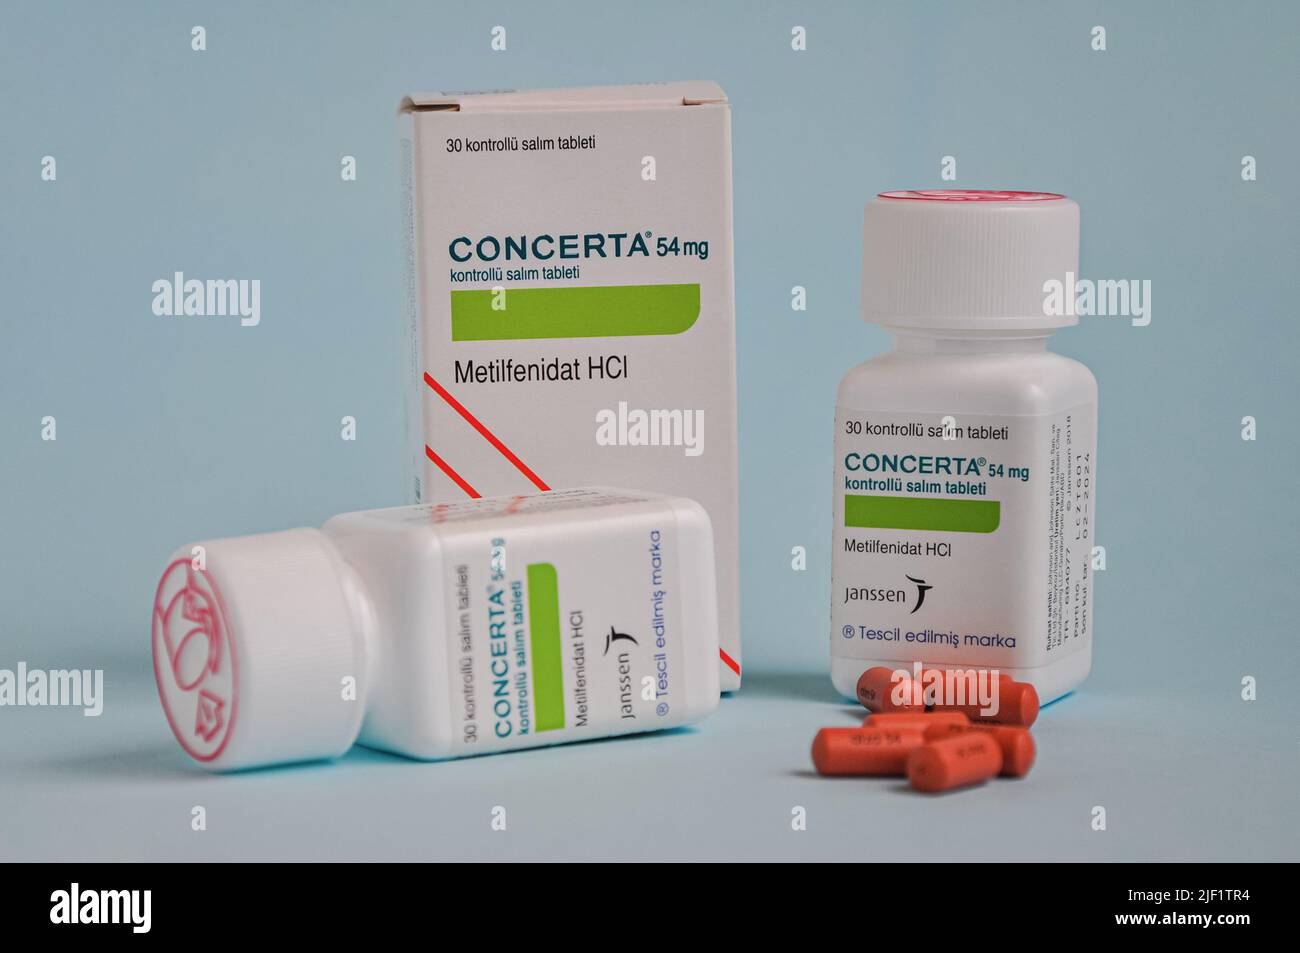 Istanbul, Turkey - June 28 2022: 54 mg of Concerta (Methylphenidate Hydrochloride), a controlled drug, used for the treatment of ADHD Stock Photo